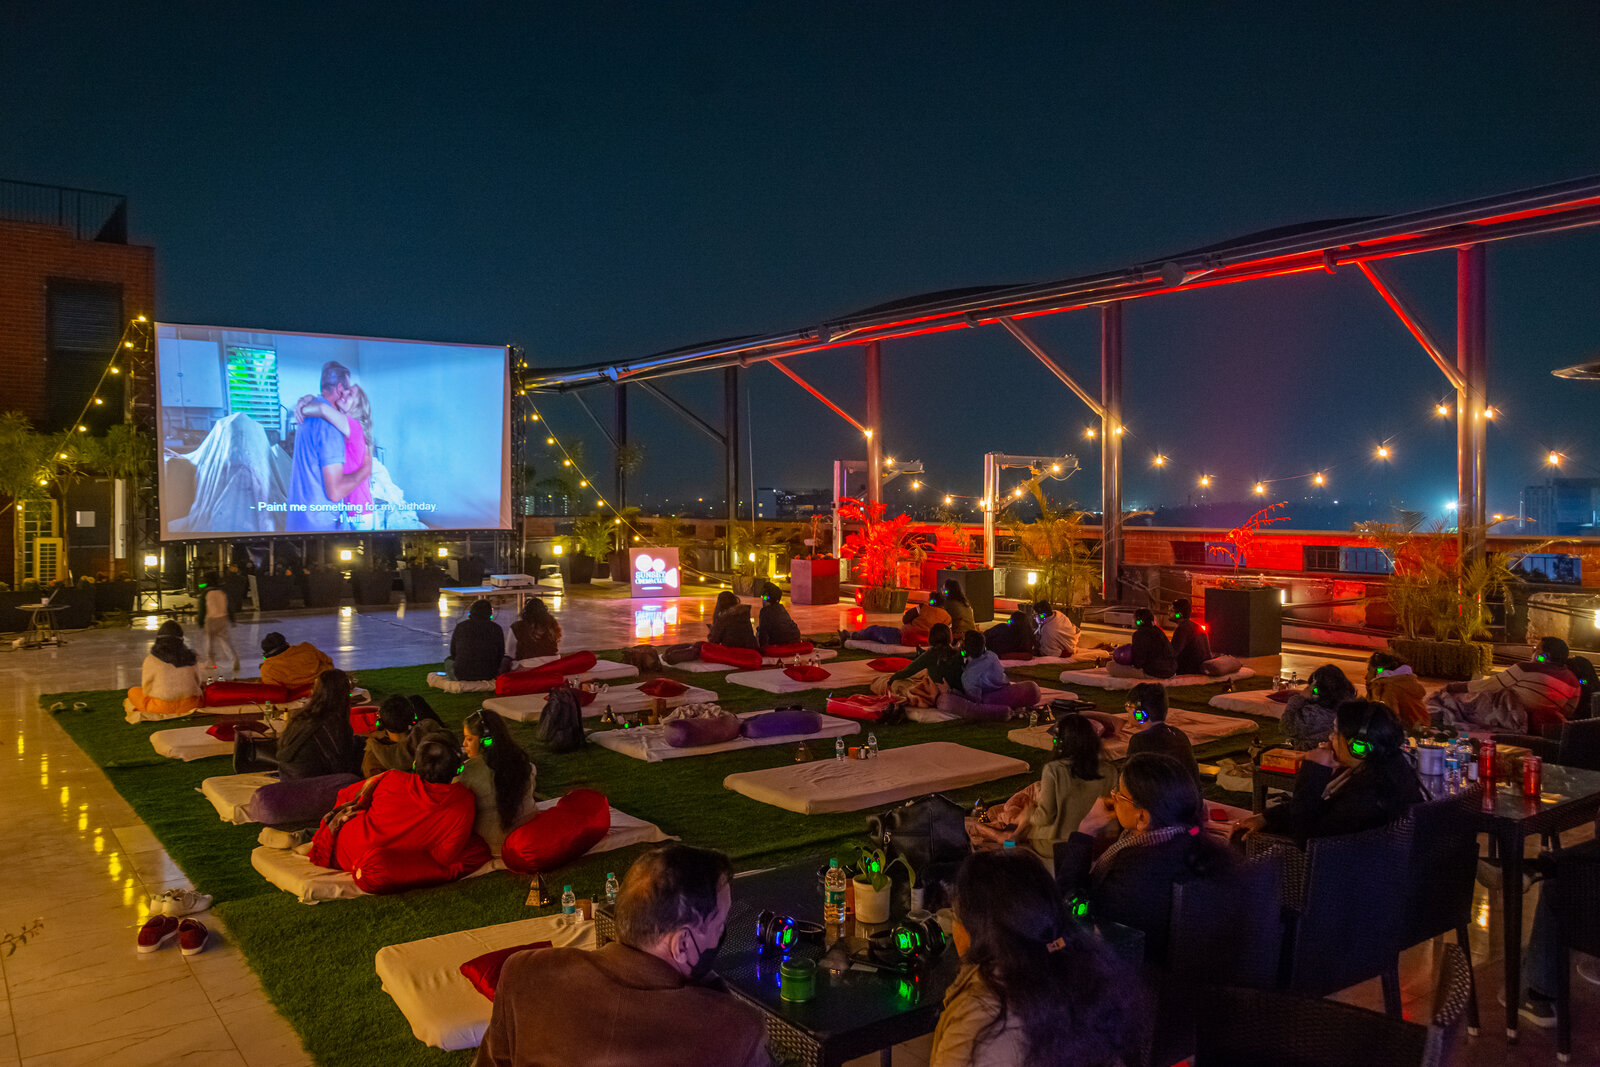 Sunset Cinema Club is all about immersive cinema experiences in India